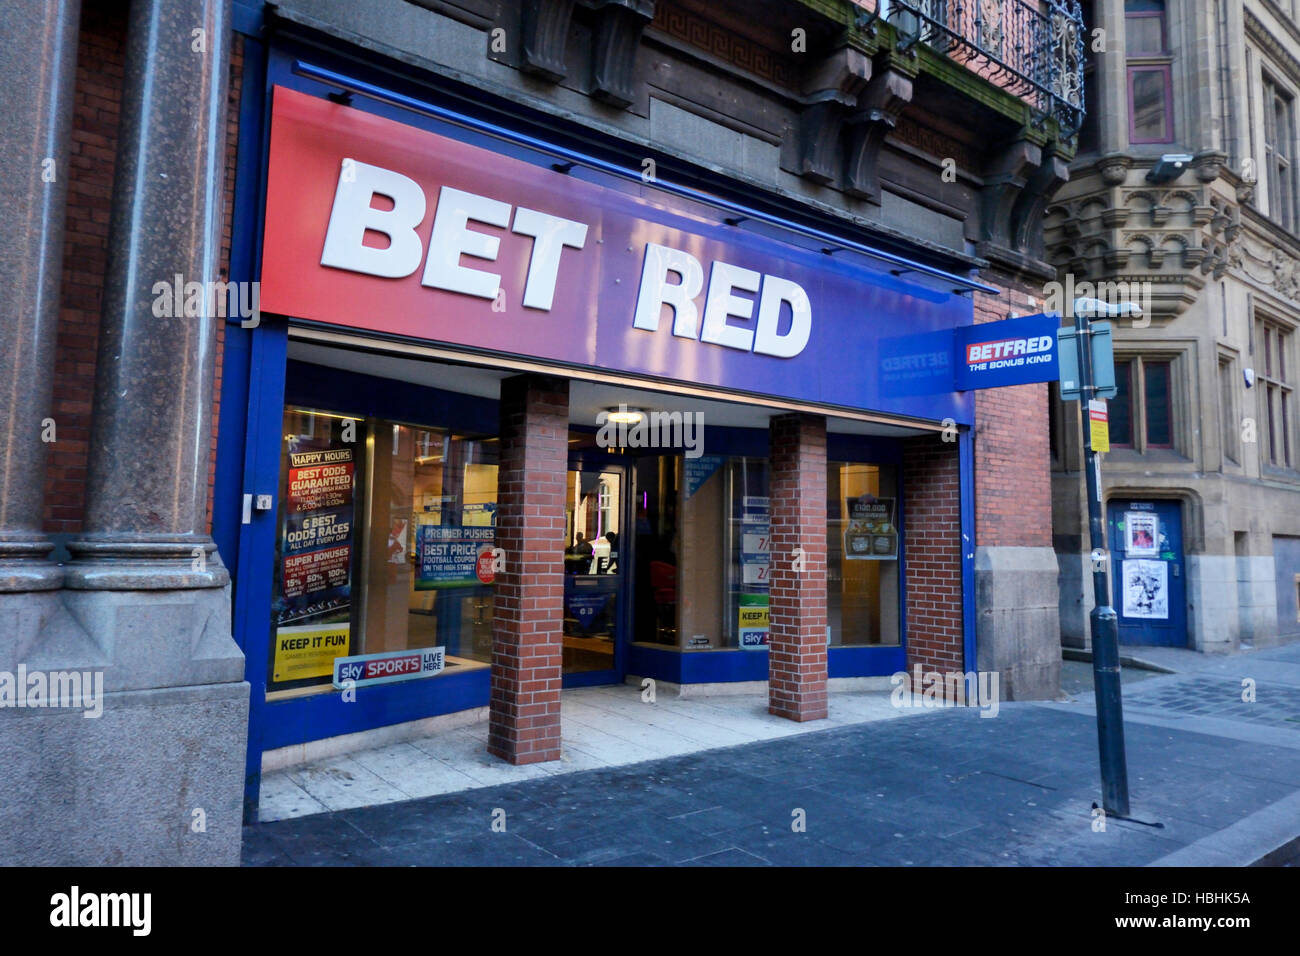 Typical Liverpool Humour - Betfreds' 'F' removed to read BET RED, the colour representing Liverpool Football Club! Stock Photo